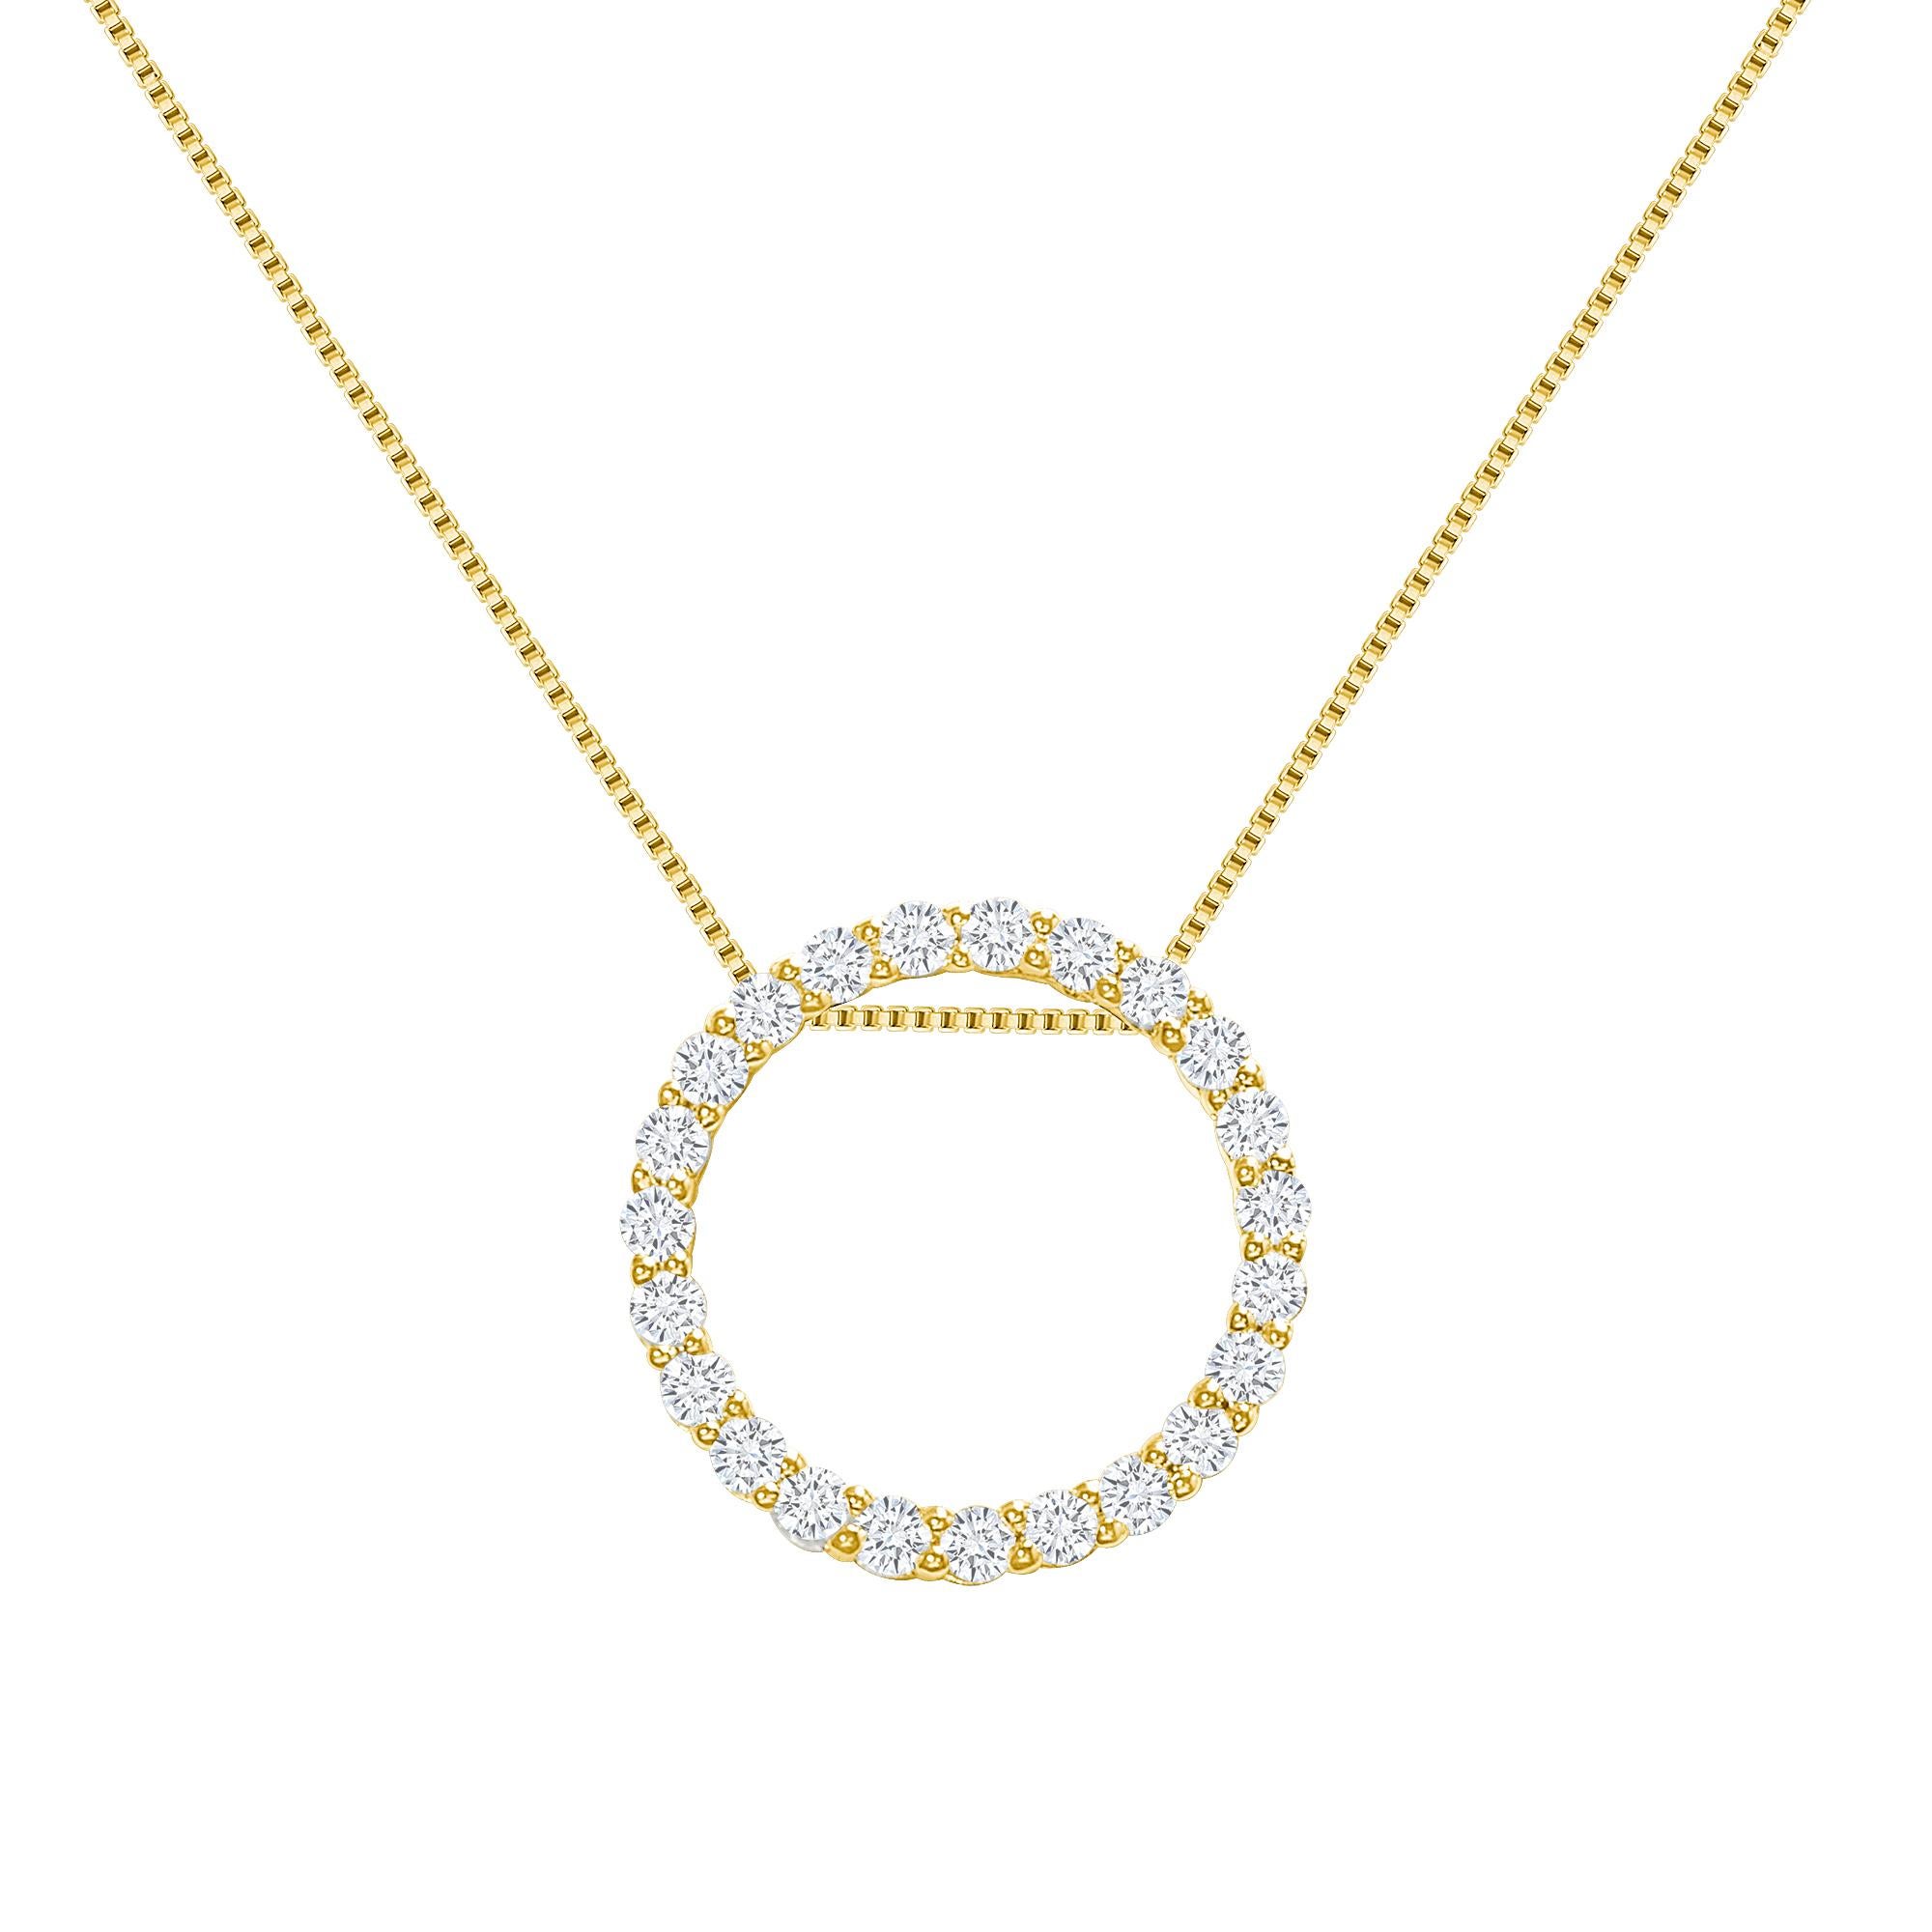 This diamond circle pendant provides a glowing chic look.
Metal: 14k Gold
Diamond Total Carats: 3 carat
Diamond Cut: Round Natural Diamonds (Not Lab Grown)
Diamond Clarity: VS
Diamond Color: F-G
Color: Yellow Gold
Necklace Length: 18 inches